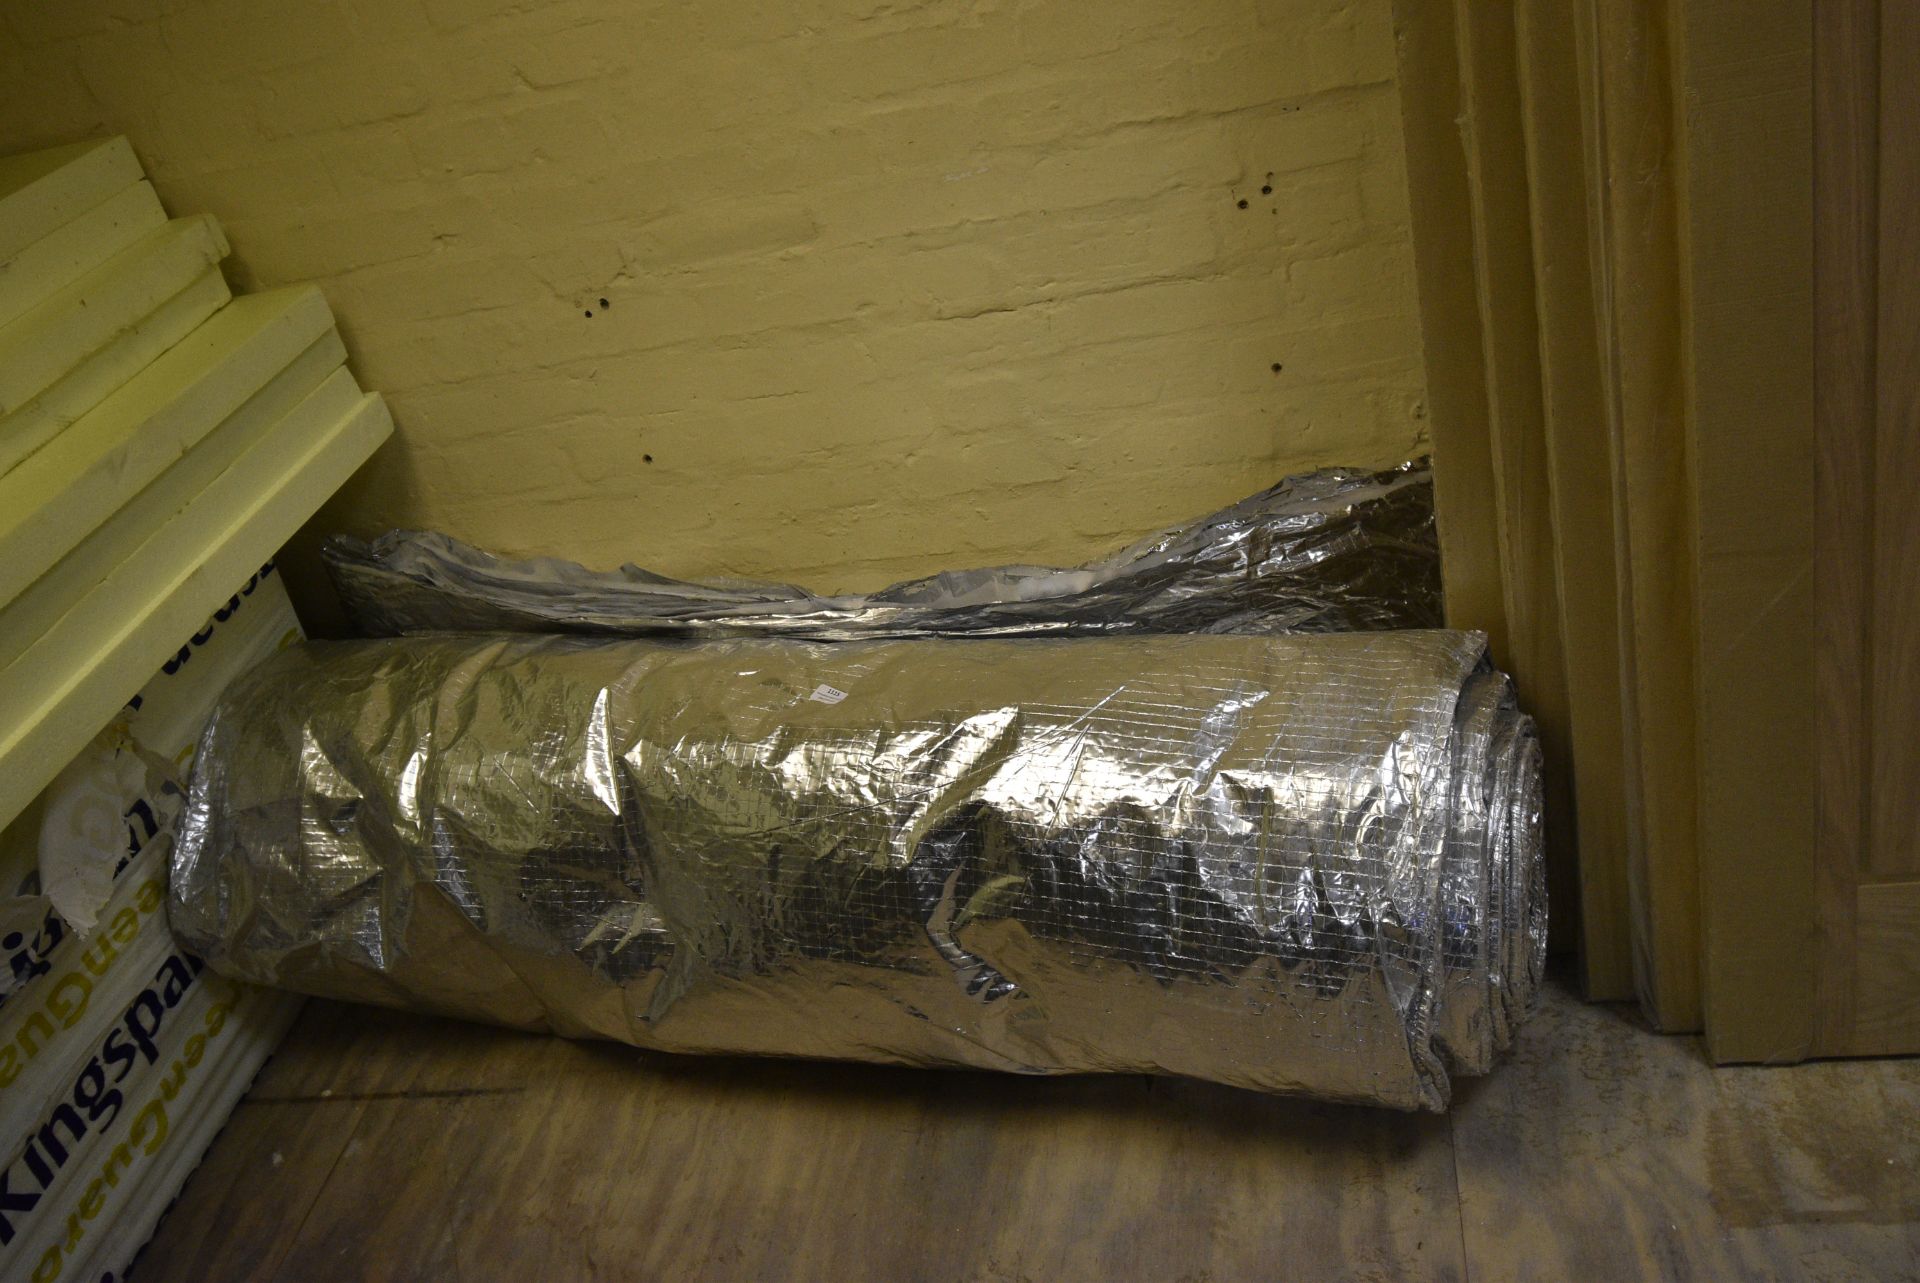 *Roll of Foil Insulation (Location: 64 King Edward St, Grimsby, DN31 3JP, Viewing Tuesday 26th, 10am